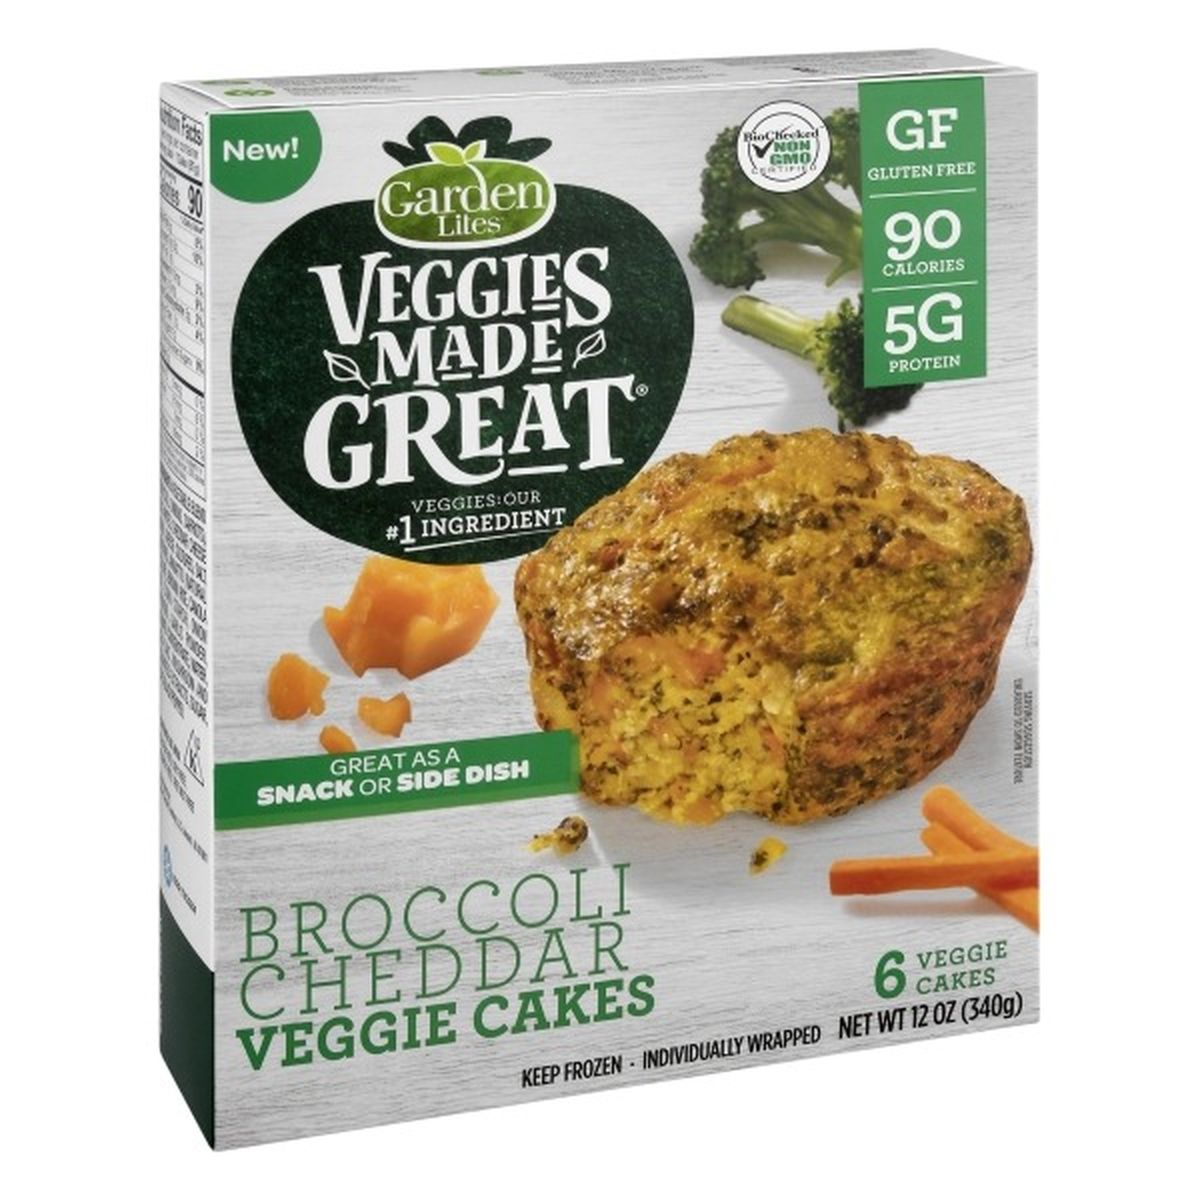 Calories in Veggies Made Great Veggie Cakes, Broccoli Cheddar